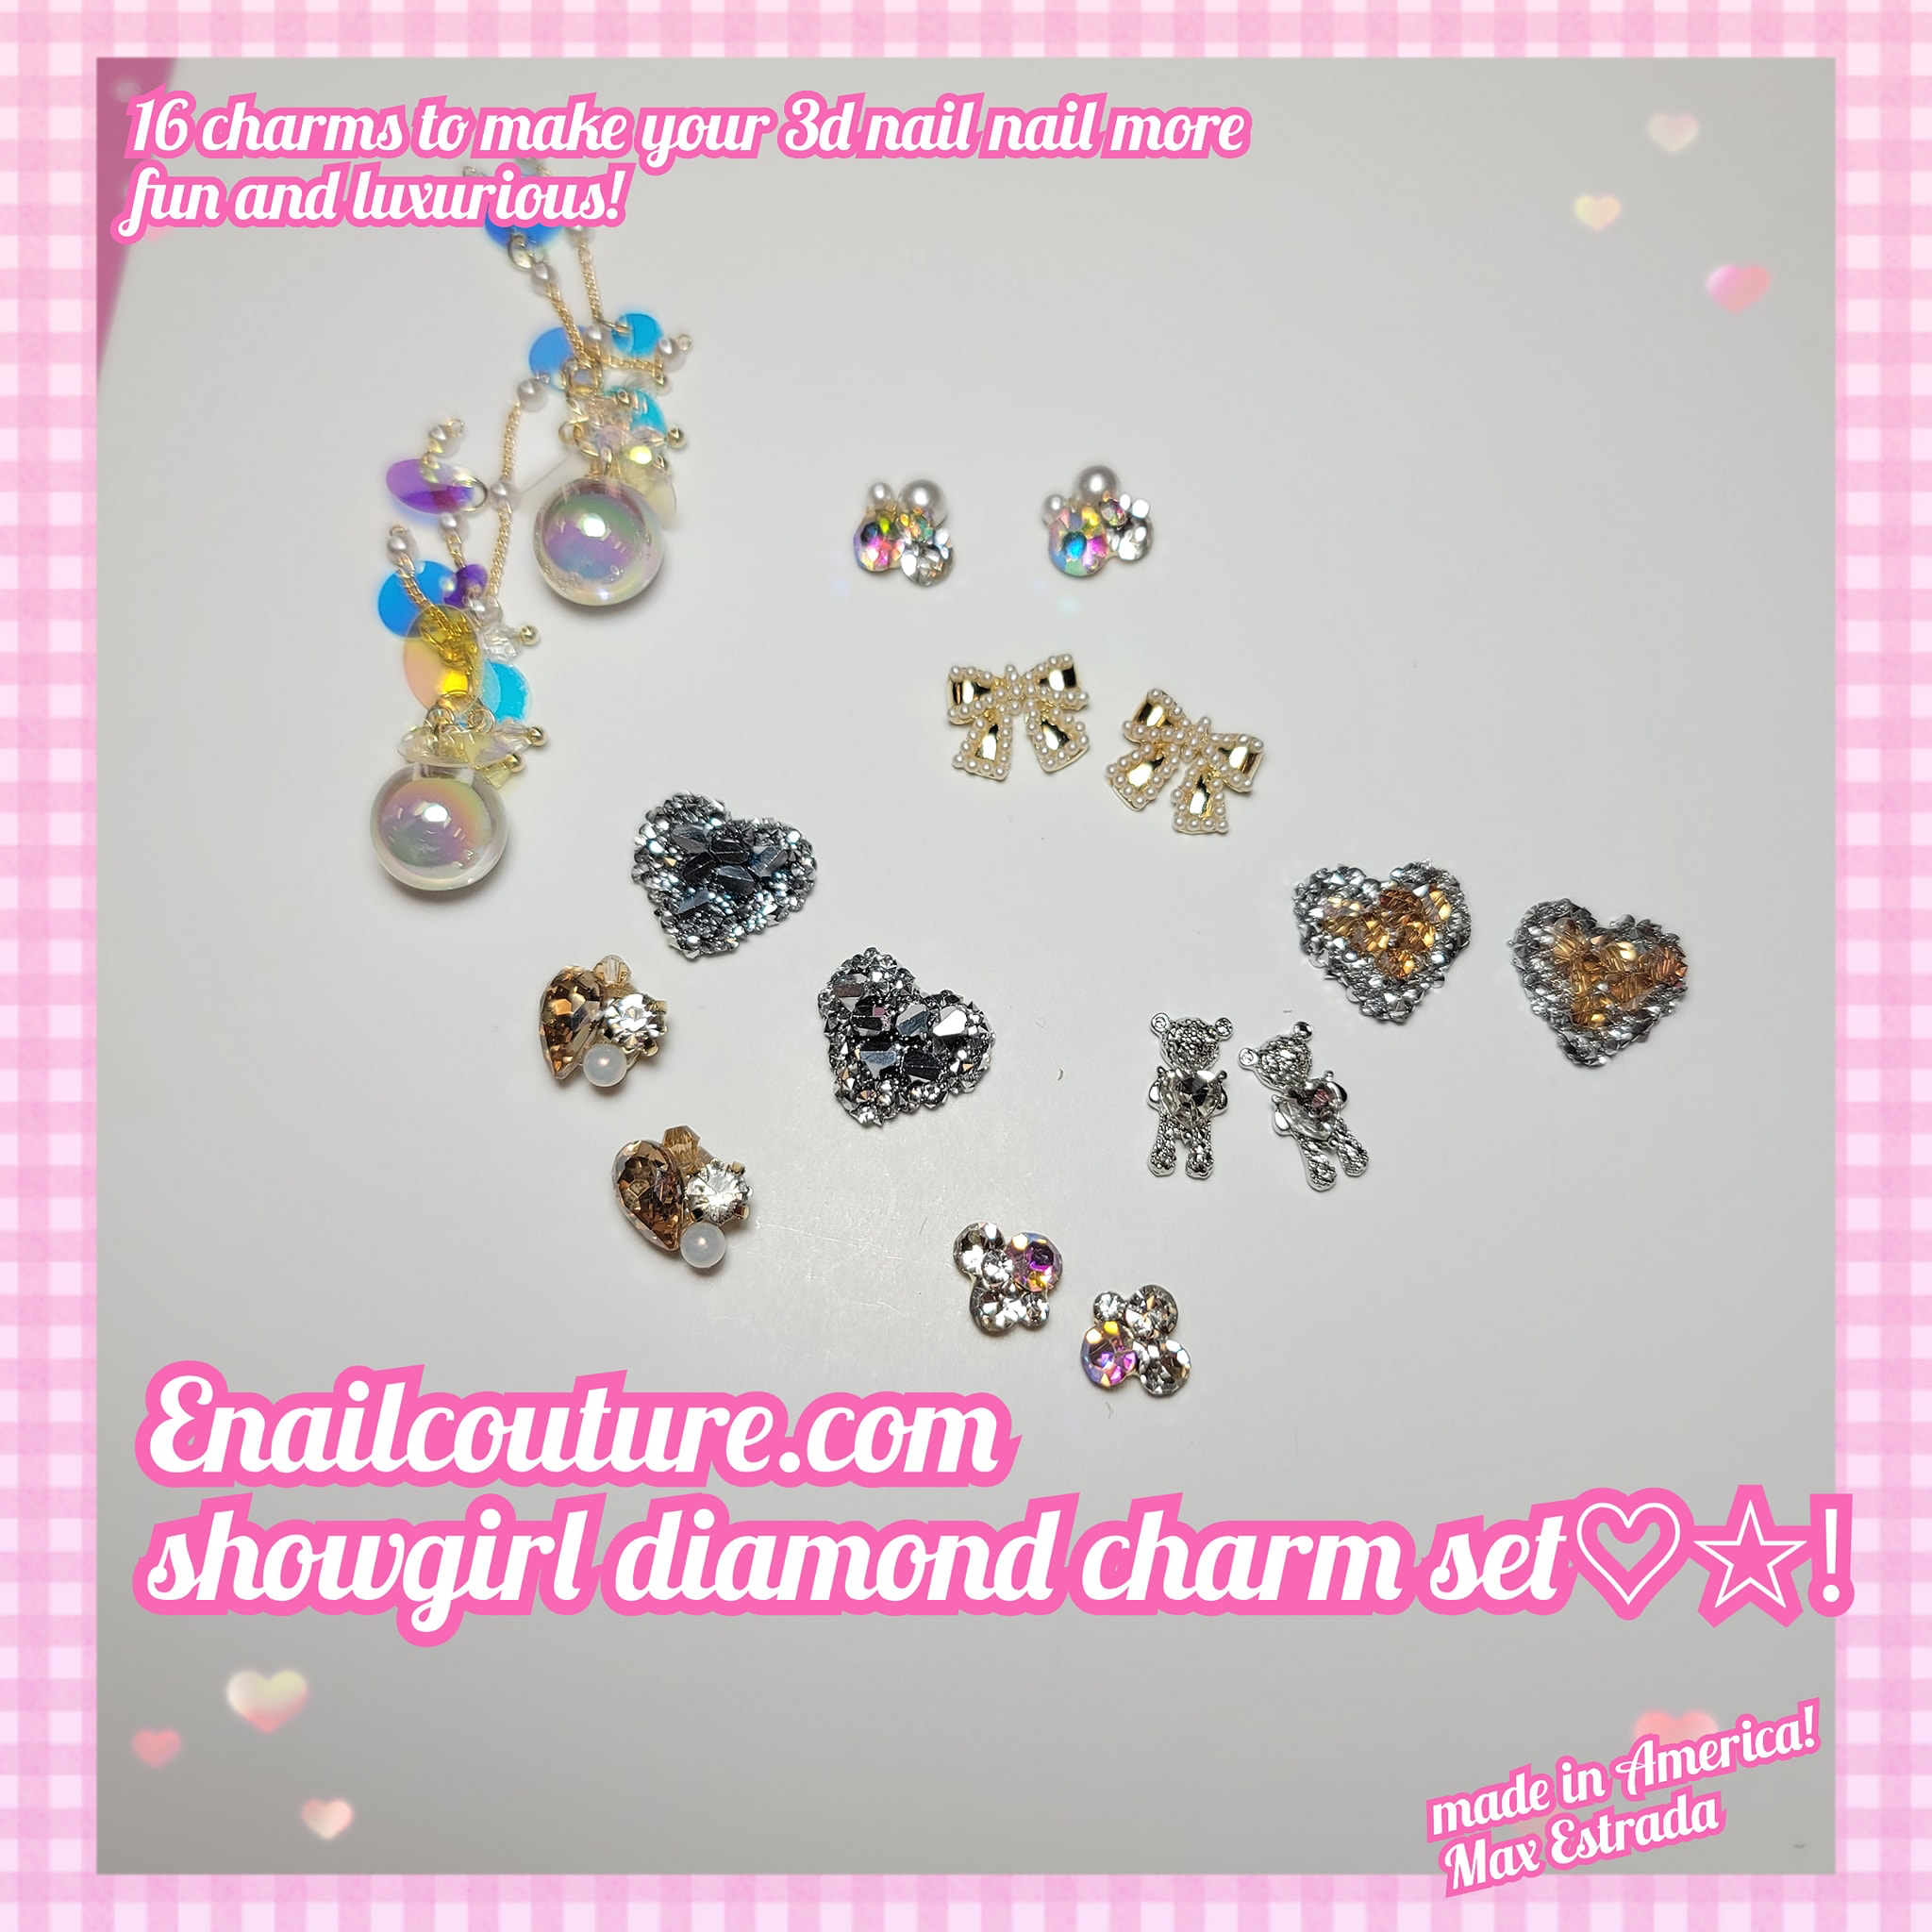 Showgirl diamond charms !~ (3D Rhinestones for Nails, Nail Art Rhinestones, Luxury Charms Crystals Diamonds Gold Metal Gem Stones for DIY Nail Art Beauty Design, Nail Decoration Craft and Jewelry DIY Making)